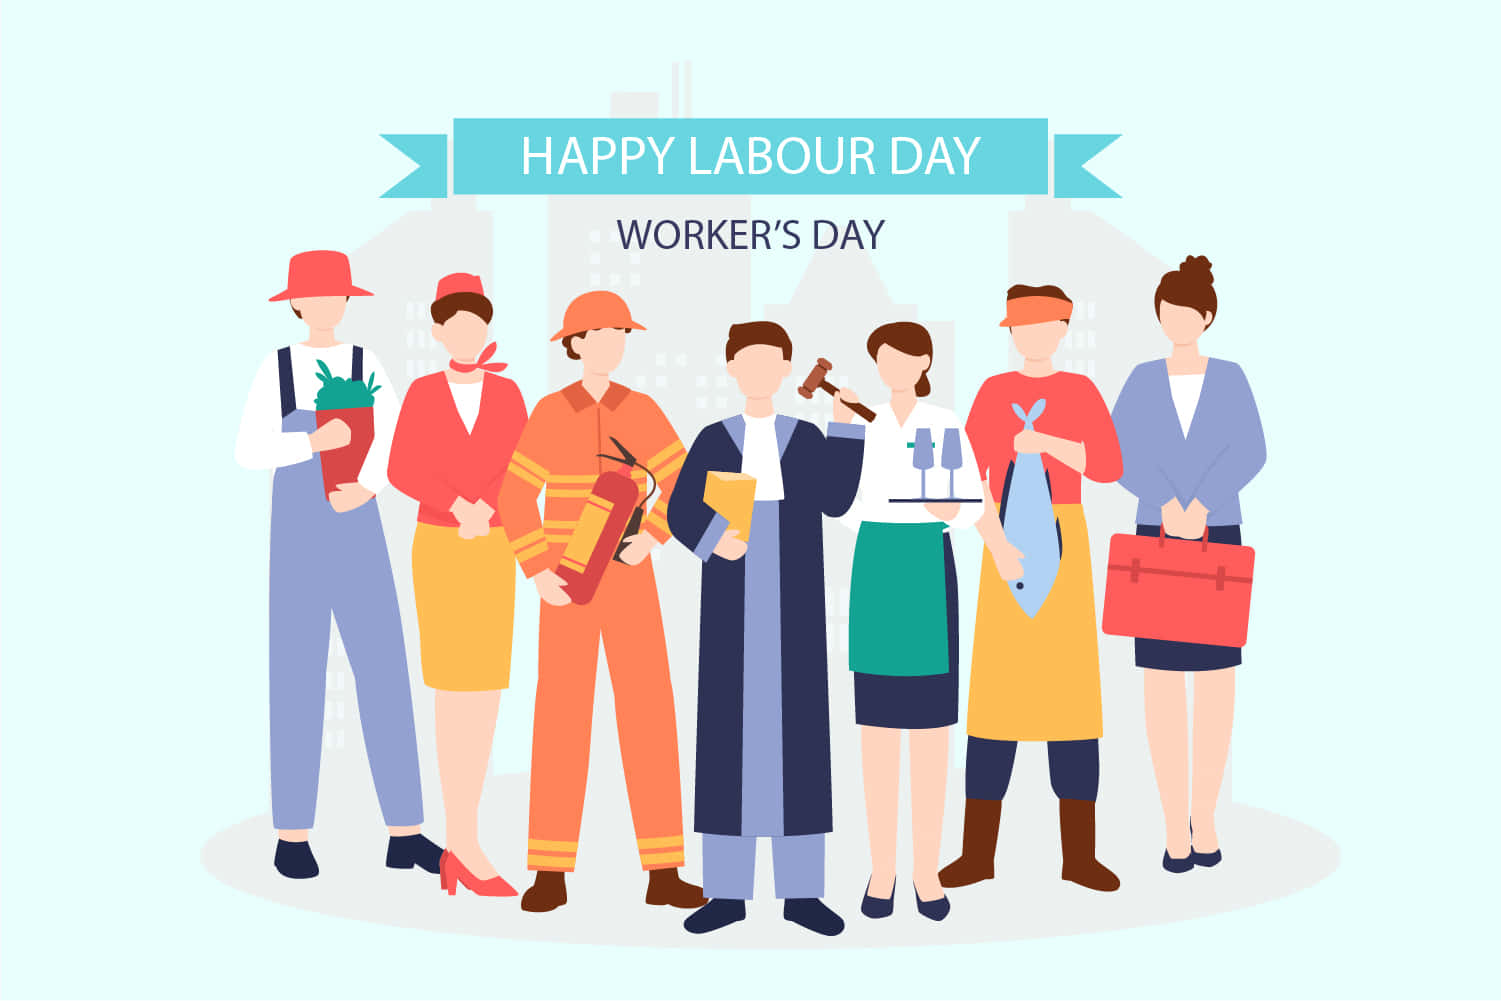 Celebrate Labor Day with Friends and Family